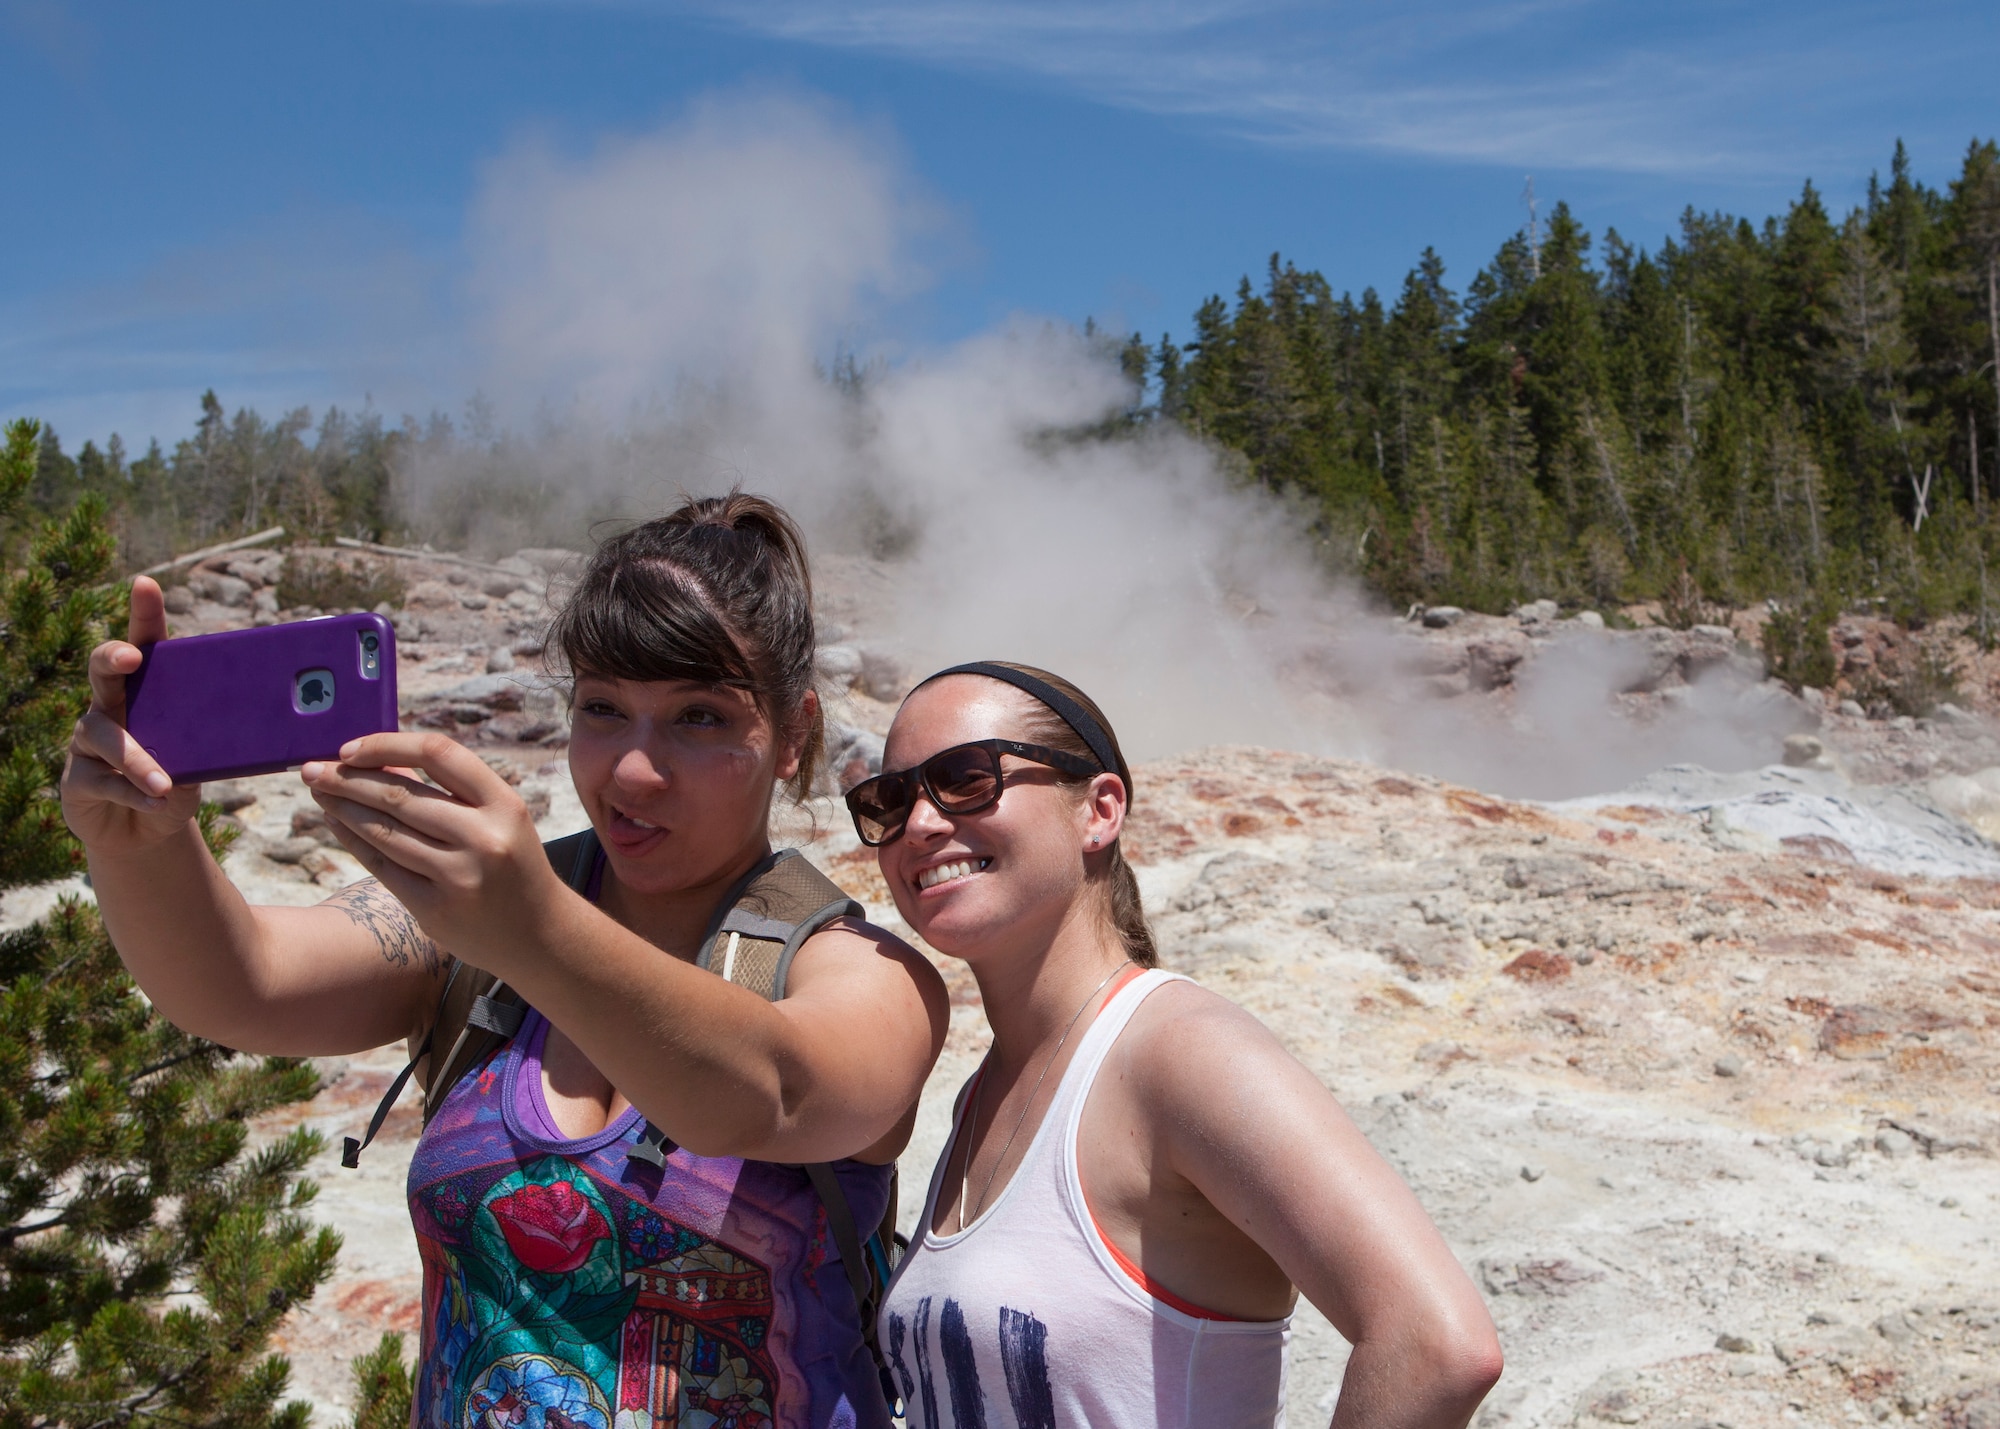 Senior Airman Marina Martinez and Rachel Silverberg, 90th Force Support Squadron, take a selfie with a geyser in the background in Yellowstone National Park, Wyo., July 4, 2015. Martinez and Silverberg were participants of an F.E. Warren Air Force Base Outdoor Recreation trip exploring Yellowstone and Grand Teton National Park for the July 4th weekend. (U.S. Air Force photo by Lan Kim)